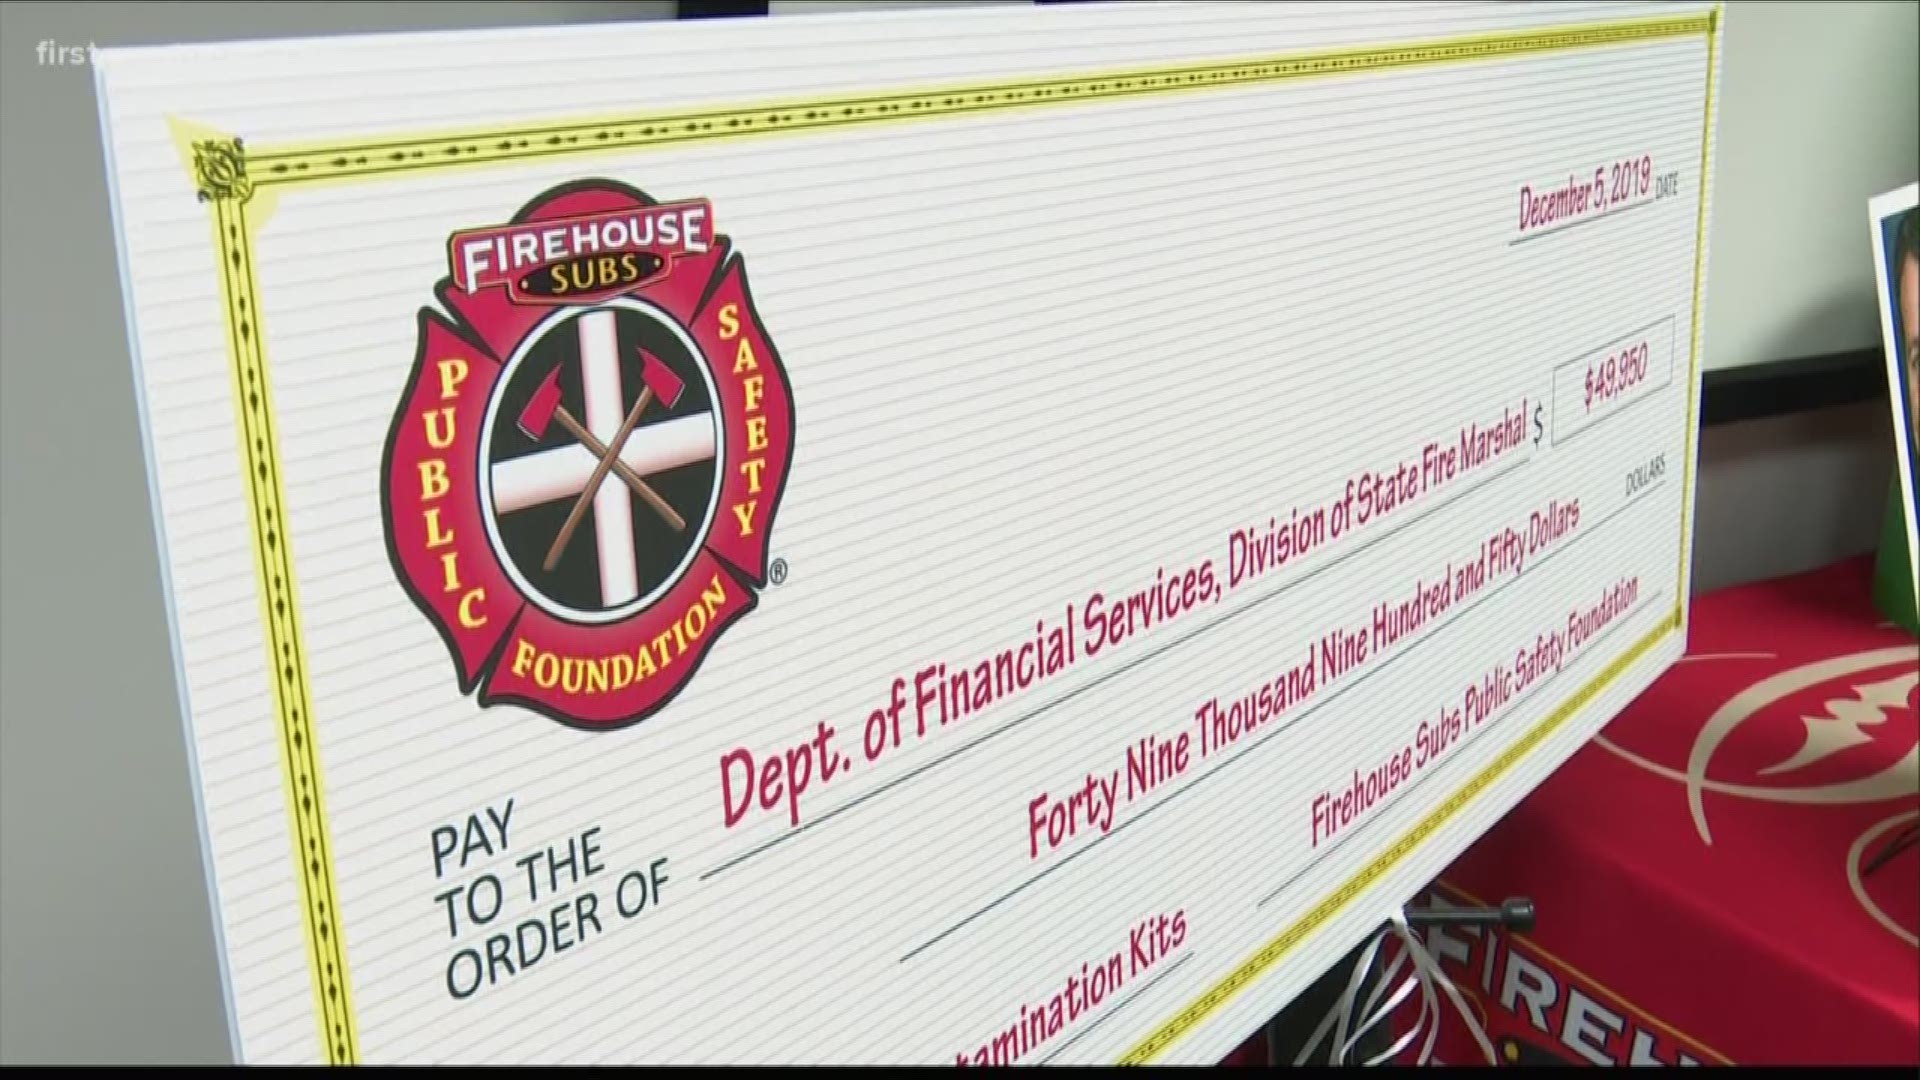 The grant presented by the Firehouse Subs Public Safety Fund will go toward decontamination kits that are a first step in reducing cancerous materials firefighters e